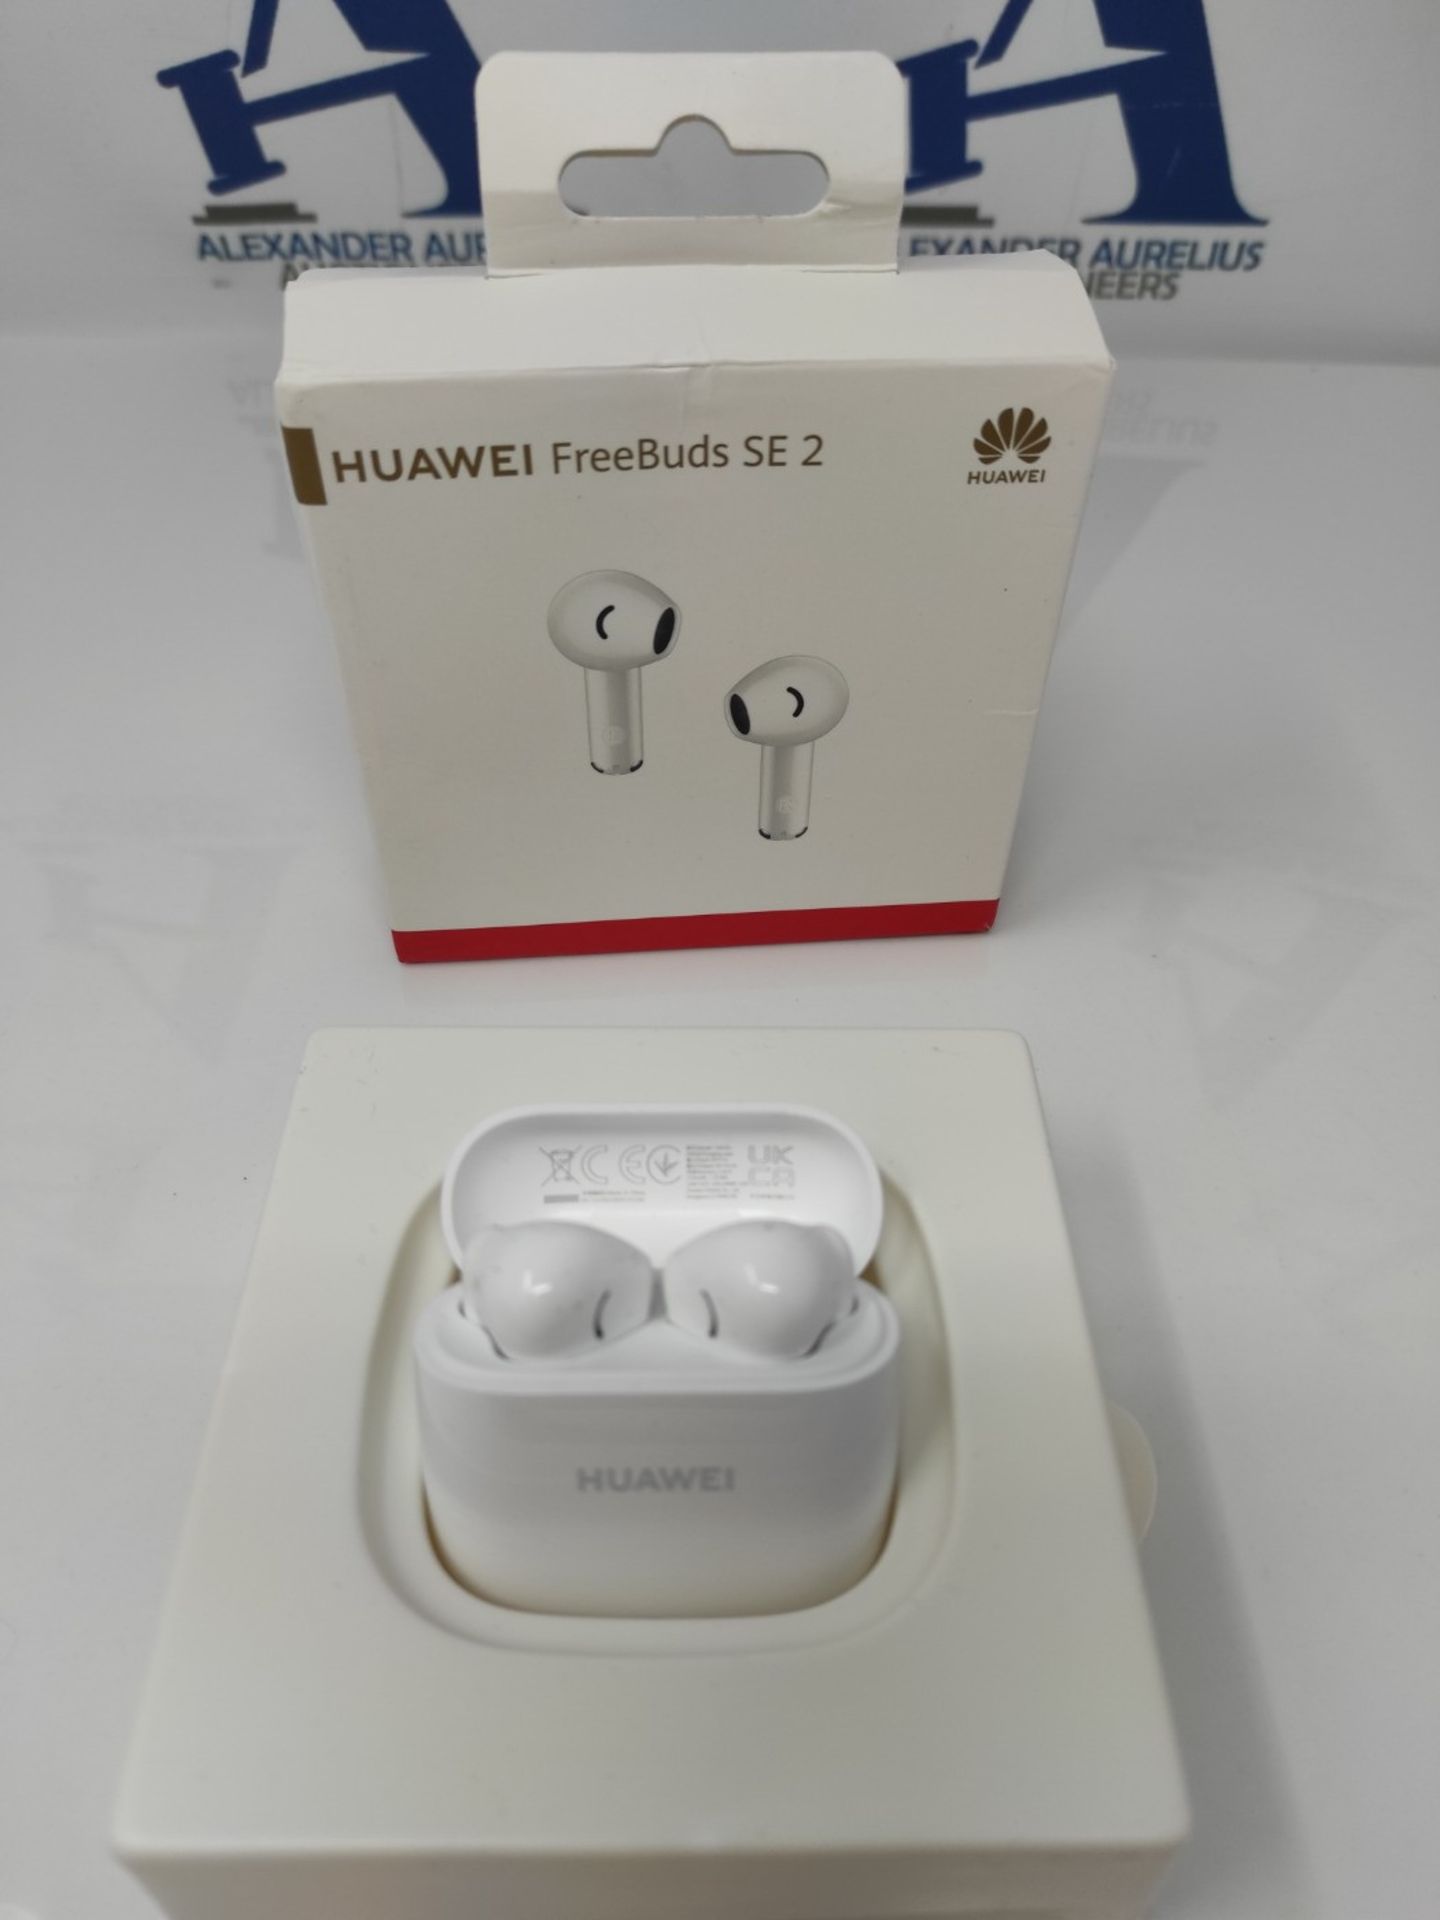 HUAWEI FreeBuds SE 2 Wireless Earbuds - 40Hour Battery Life Earphones - Bluetooth In-E - Image 2 of 2